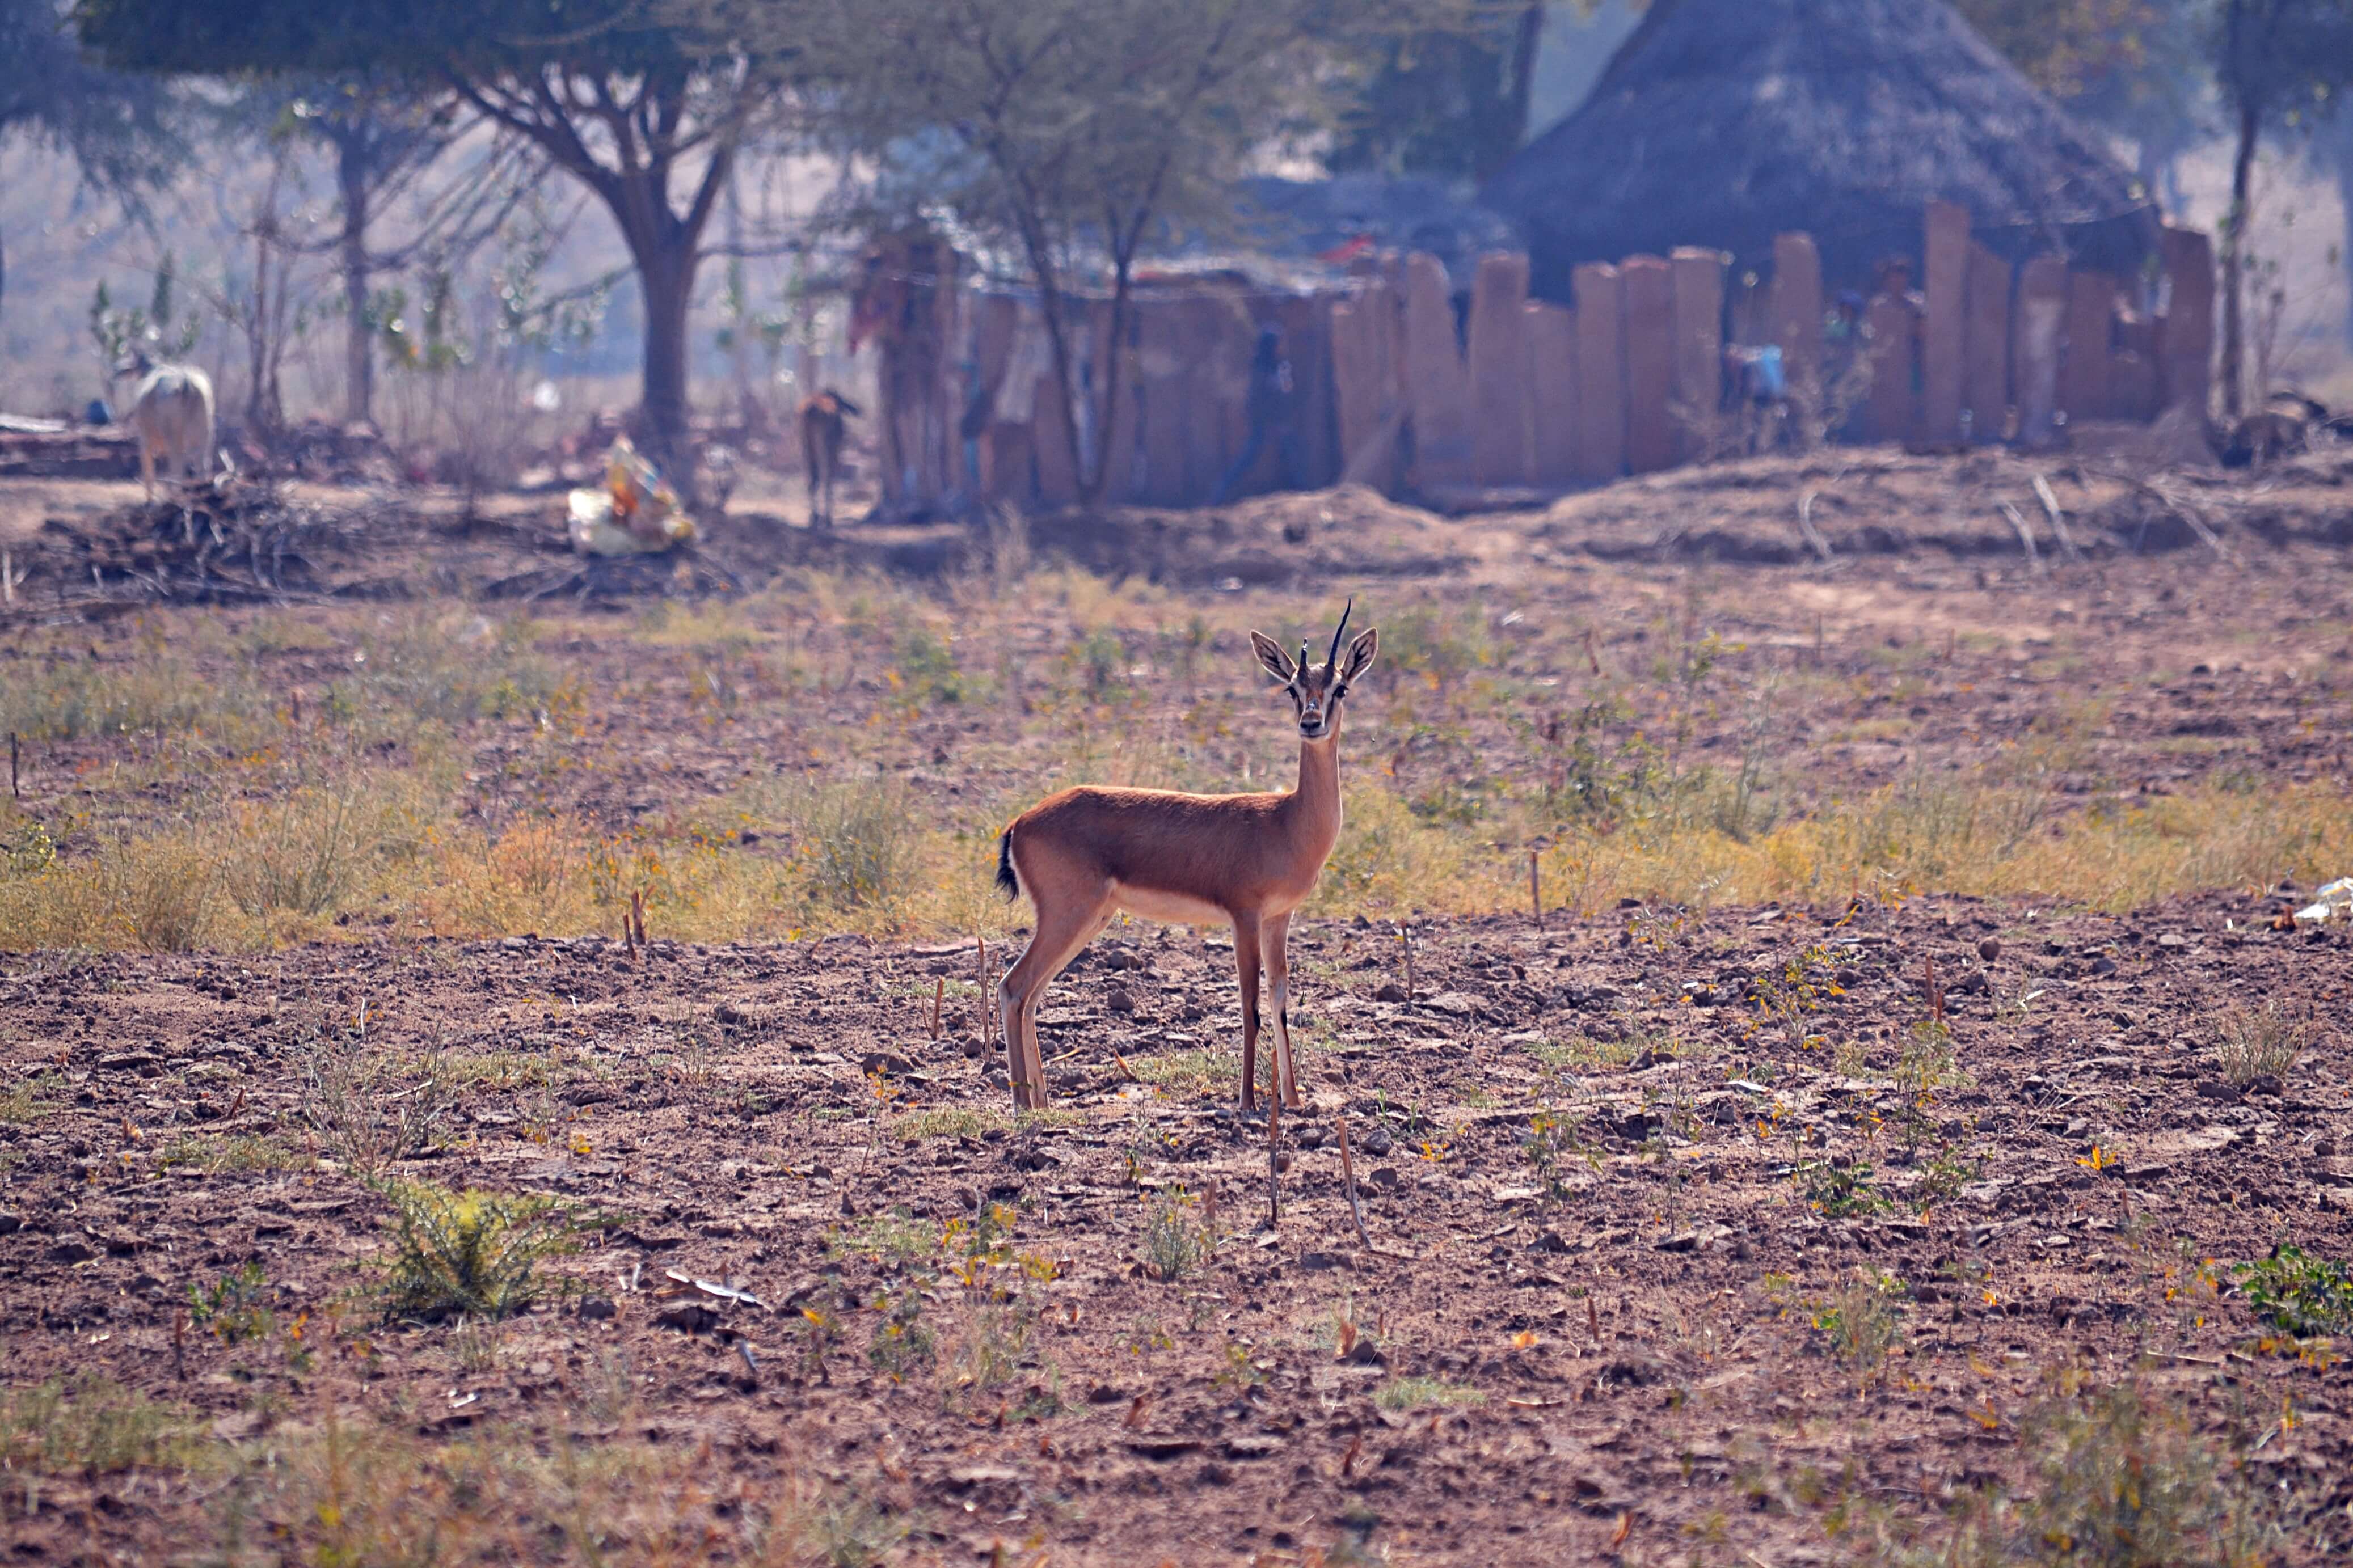 A chinkara (a type of Indian gazelle) grazing near the village. Unique wildlife is a draw for travellers, who can embark go on safaris during their stay. Photo by Stuti Bhadauria